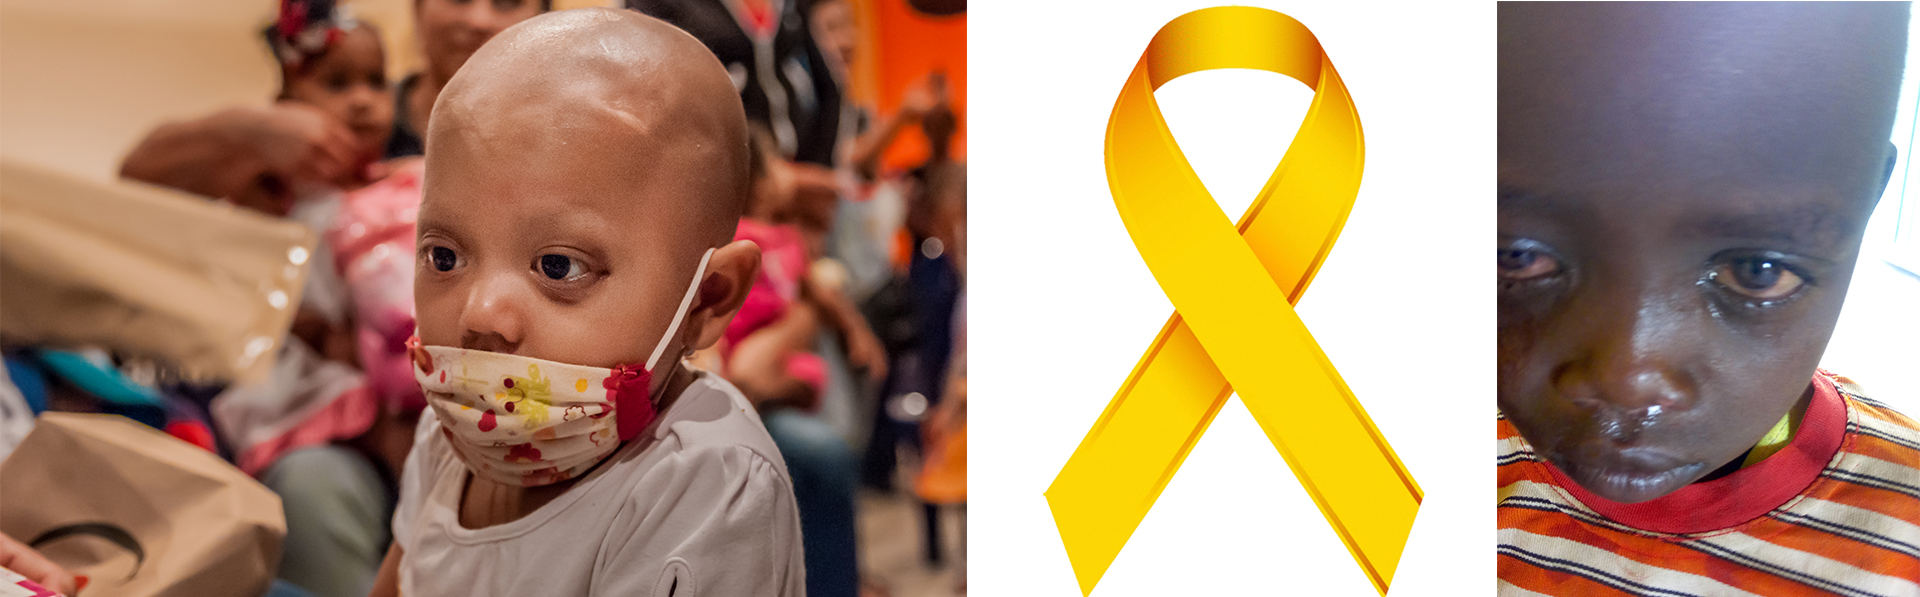 The fight against childhood cancer